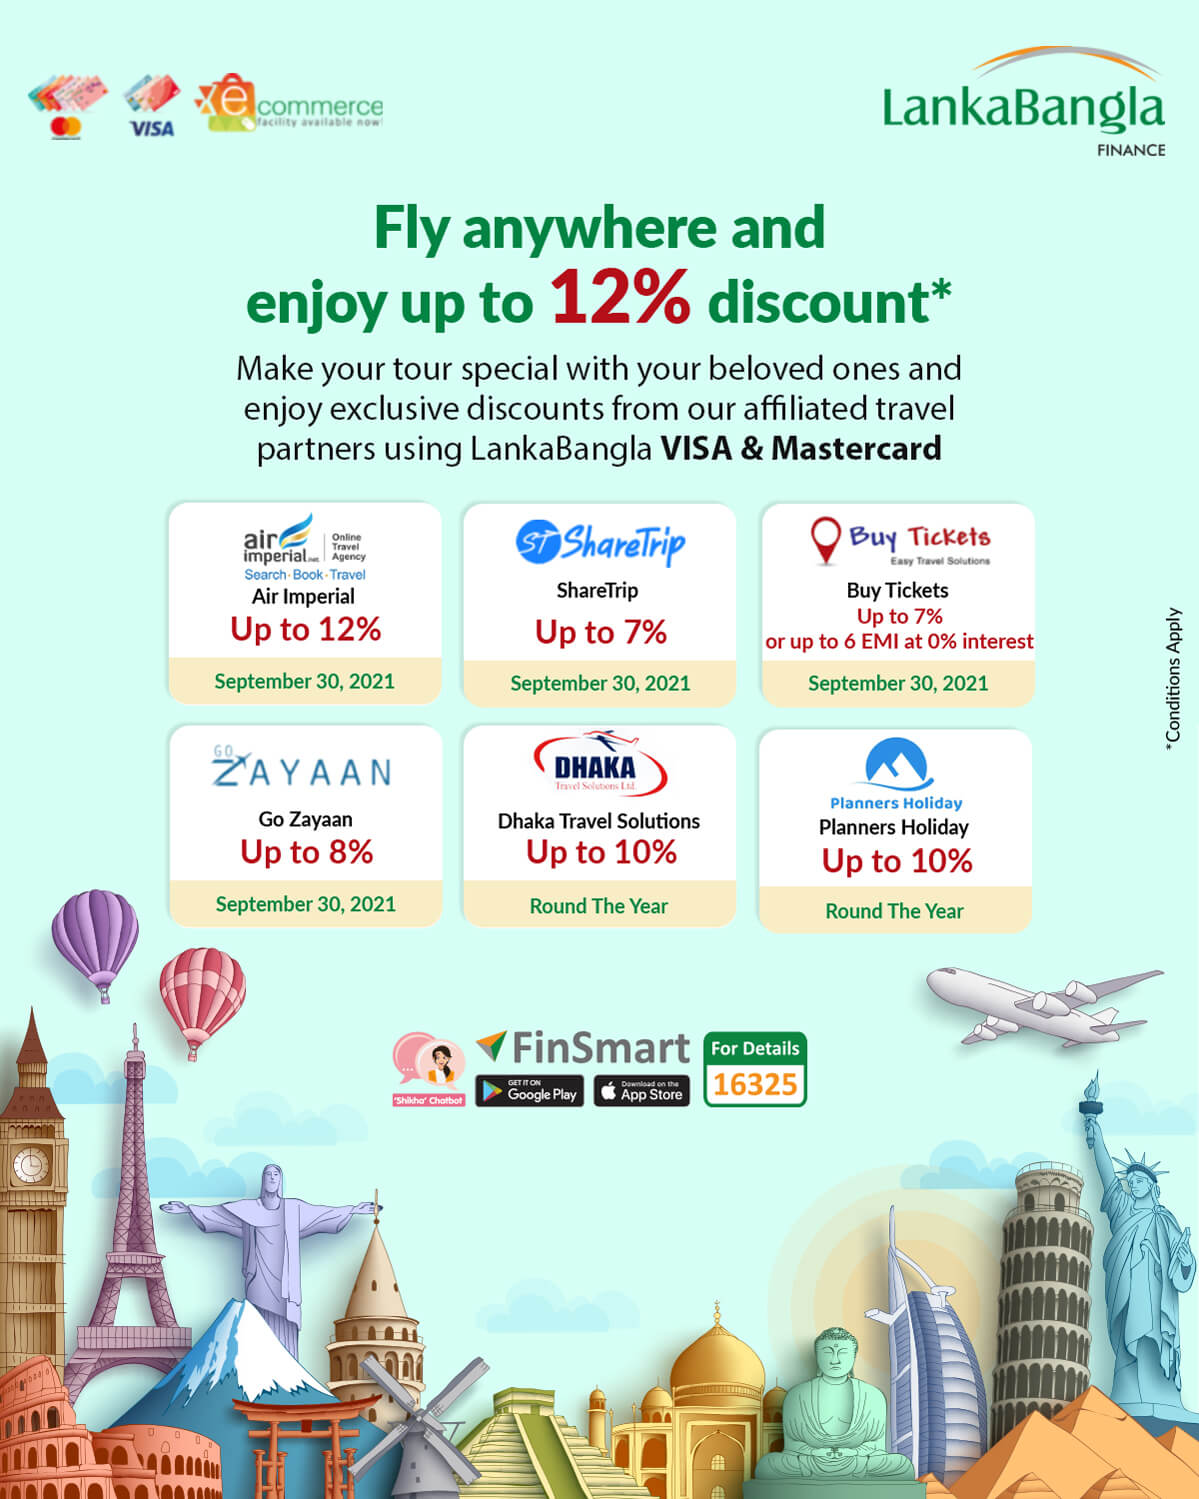 Fly anywhere and enjoy up to 12% discount